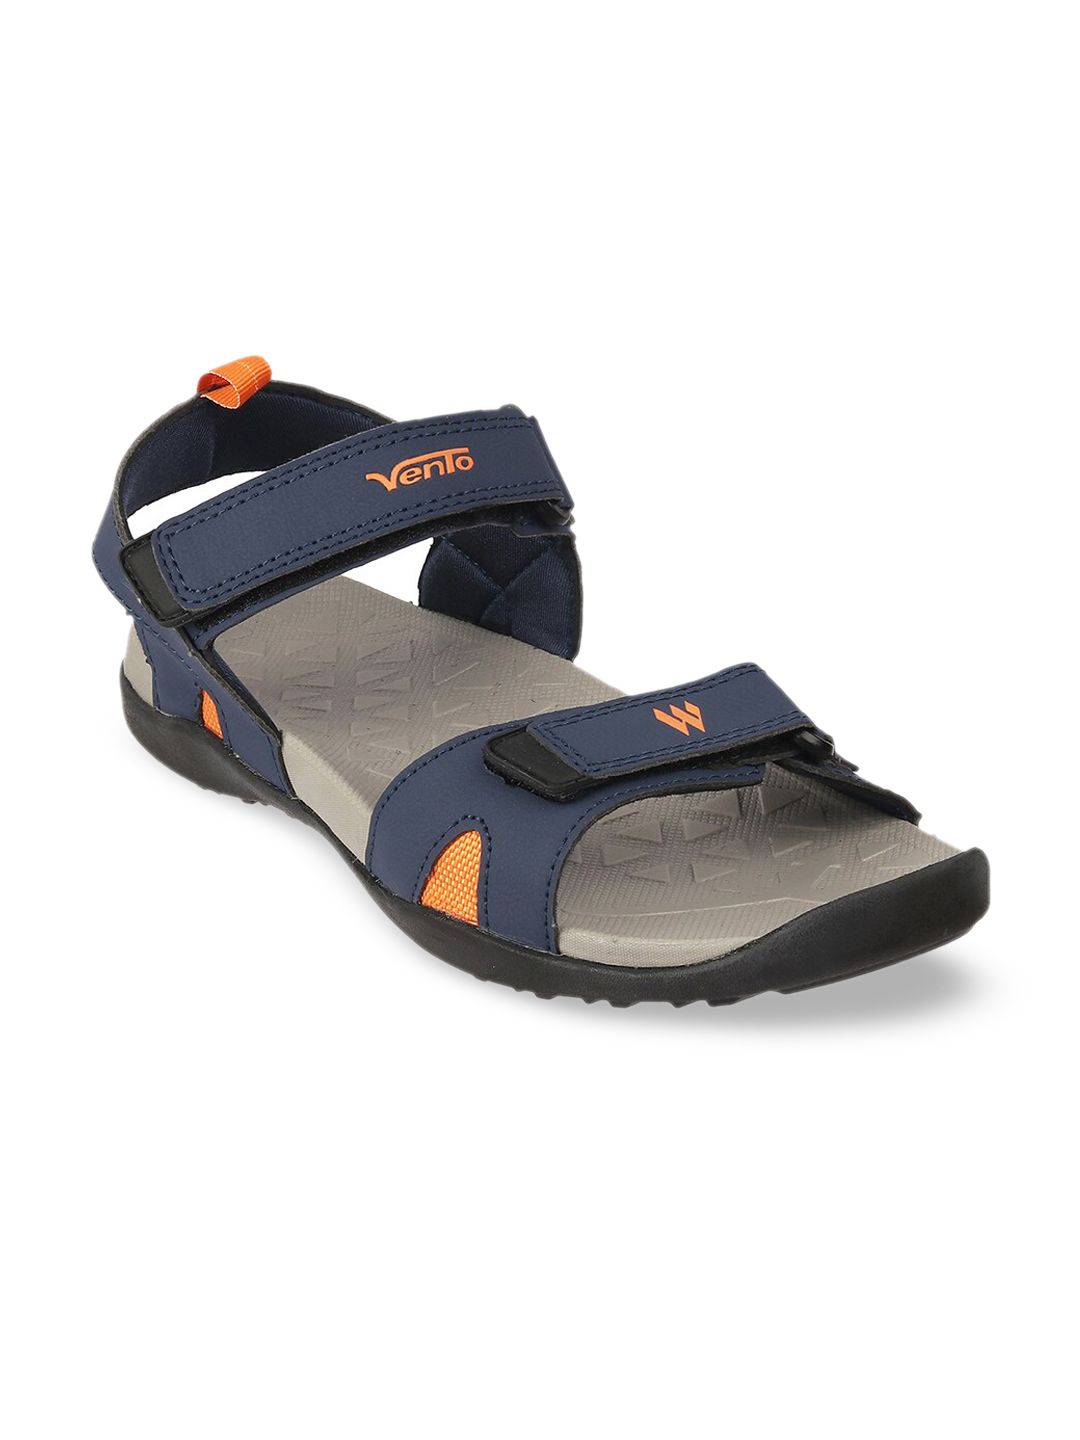 Vento Unisex Navy Blue & Grey Solid Sports Sandals Price in India